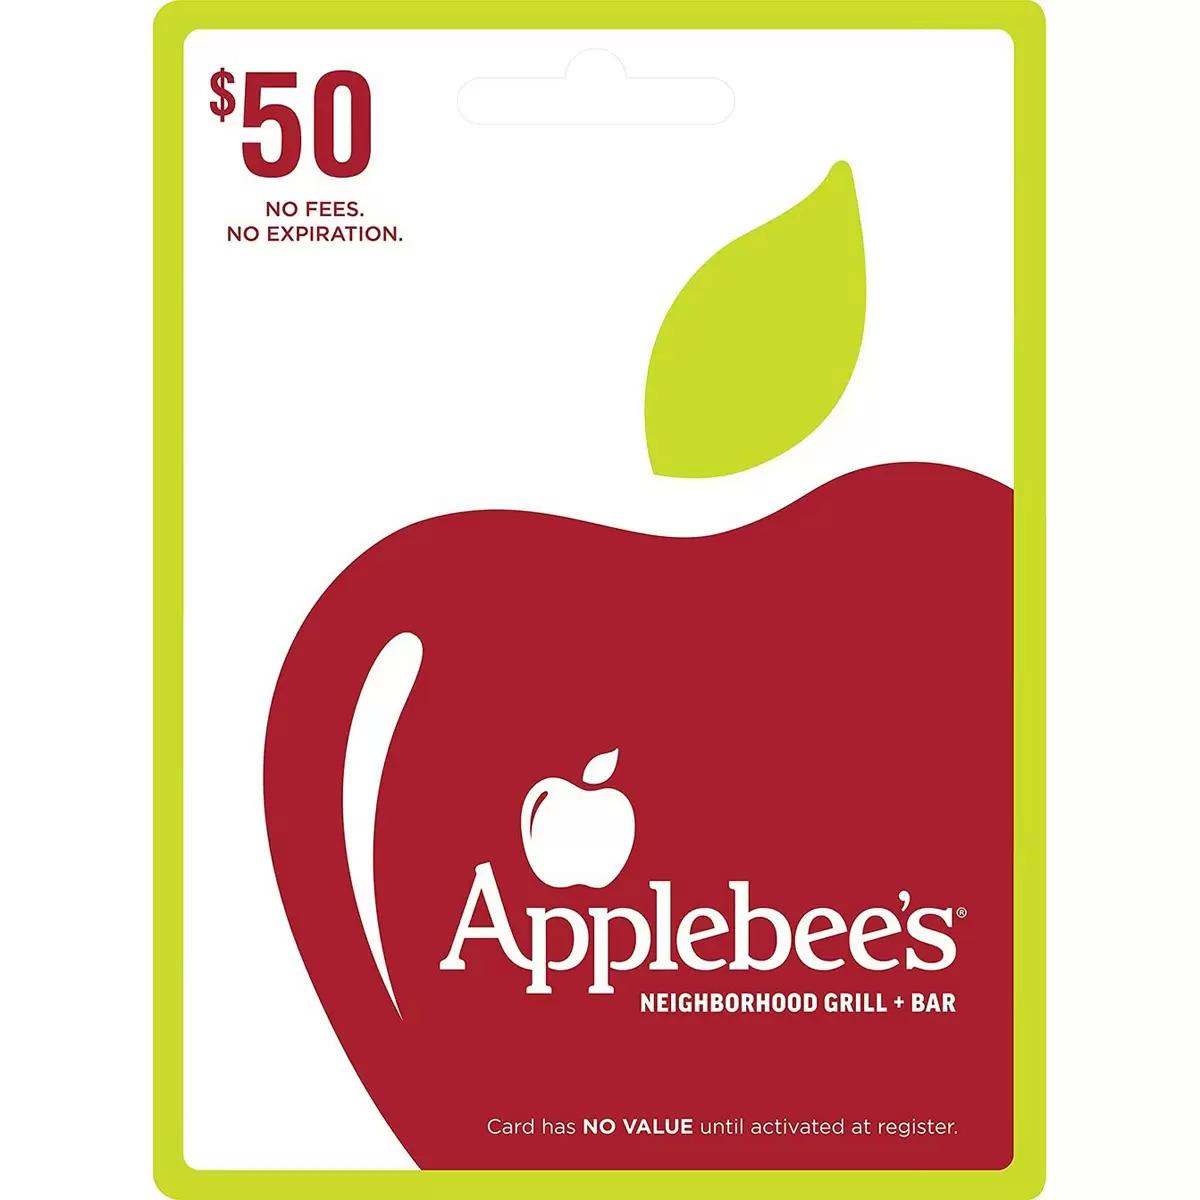 Free $20 in Applebees Bonus Cards for Purchasing a $50 Applebees Gift Card